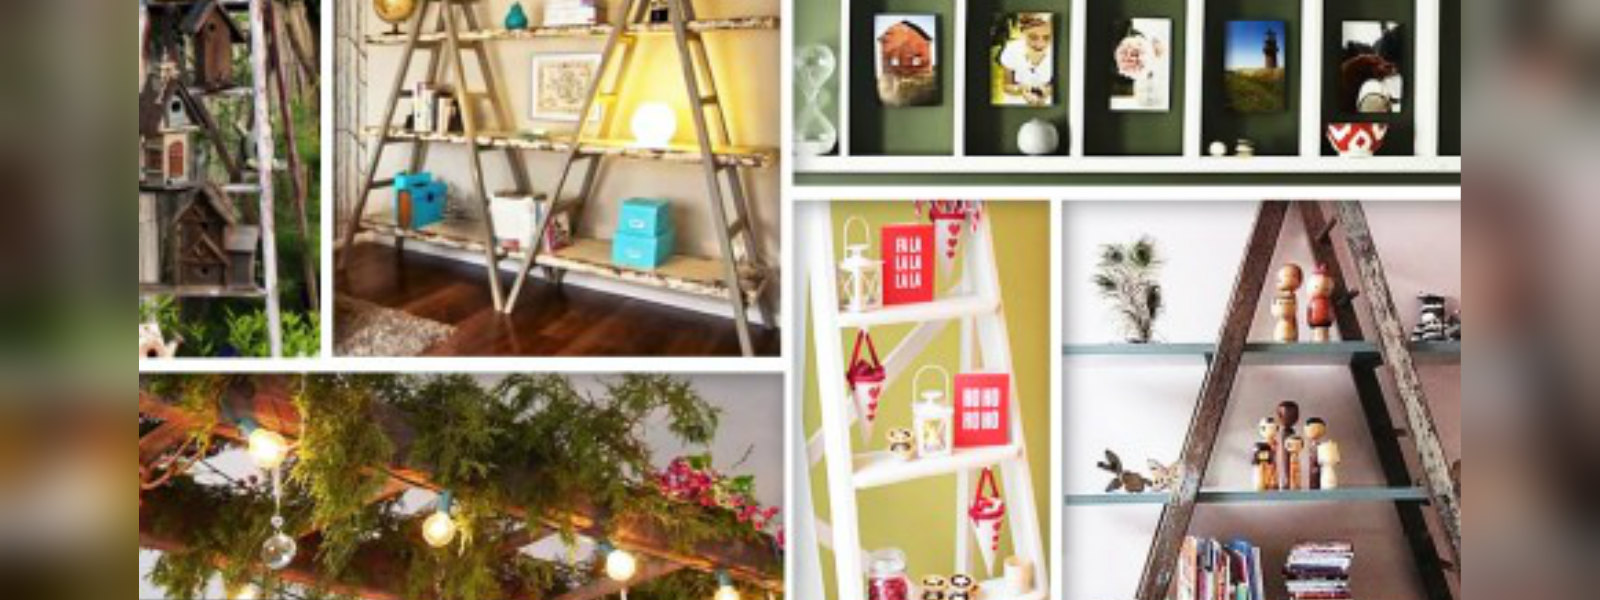 5 Ways to Decorate With Vintage Ladders...